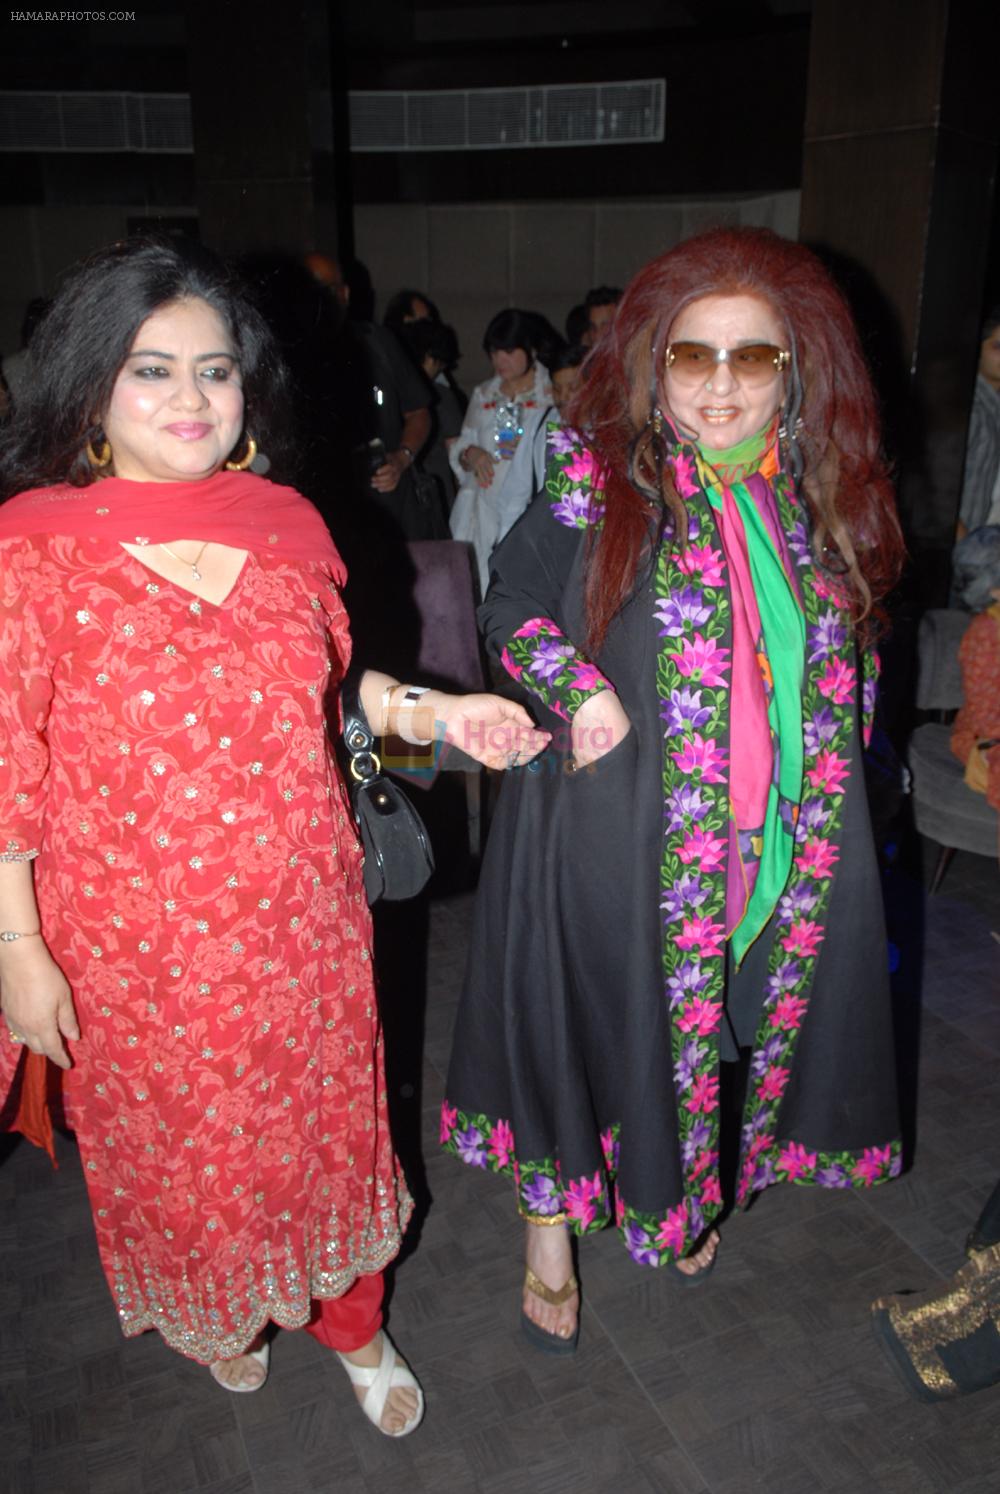 Niloffer Currimbhoy and Shahnaz Husain at the launch of singer Azaan Khan's debut album Philo- sufi in New Delhi on 30th March 2012